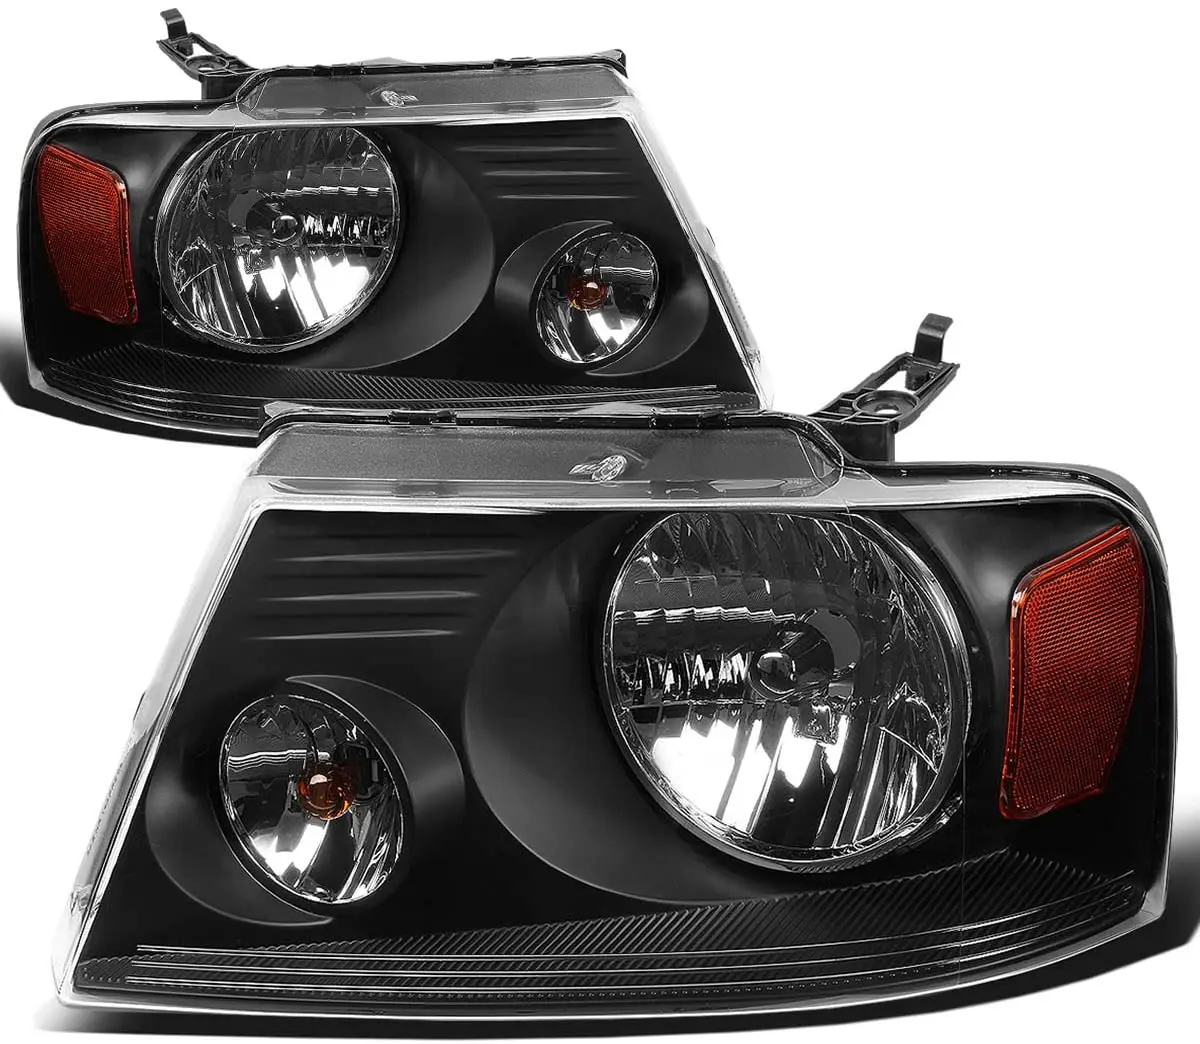 

Motoring HL-OH-F1504-BK-AM Black Amber Headlights Replacement Compatible with 04-08 F-150/06-08 Mark LT